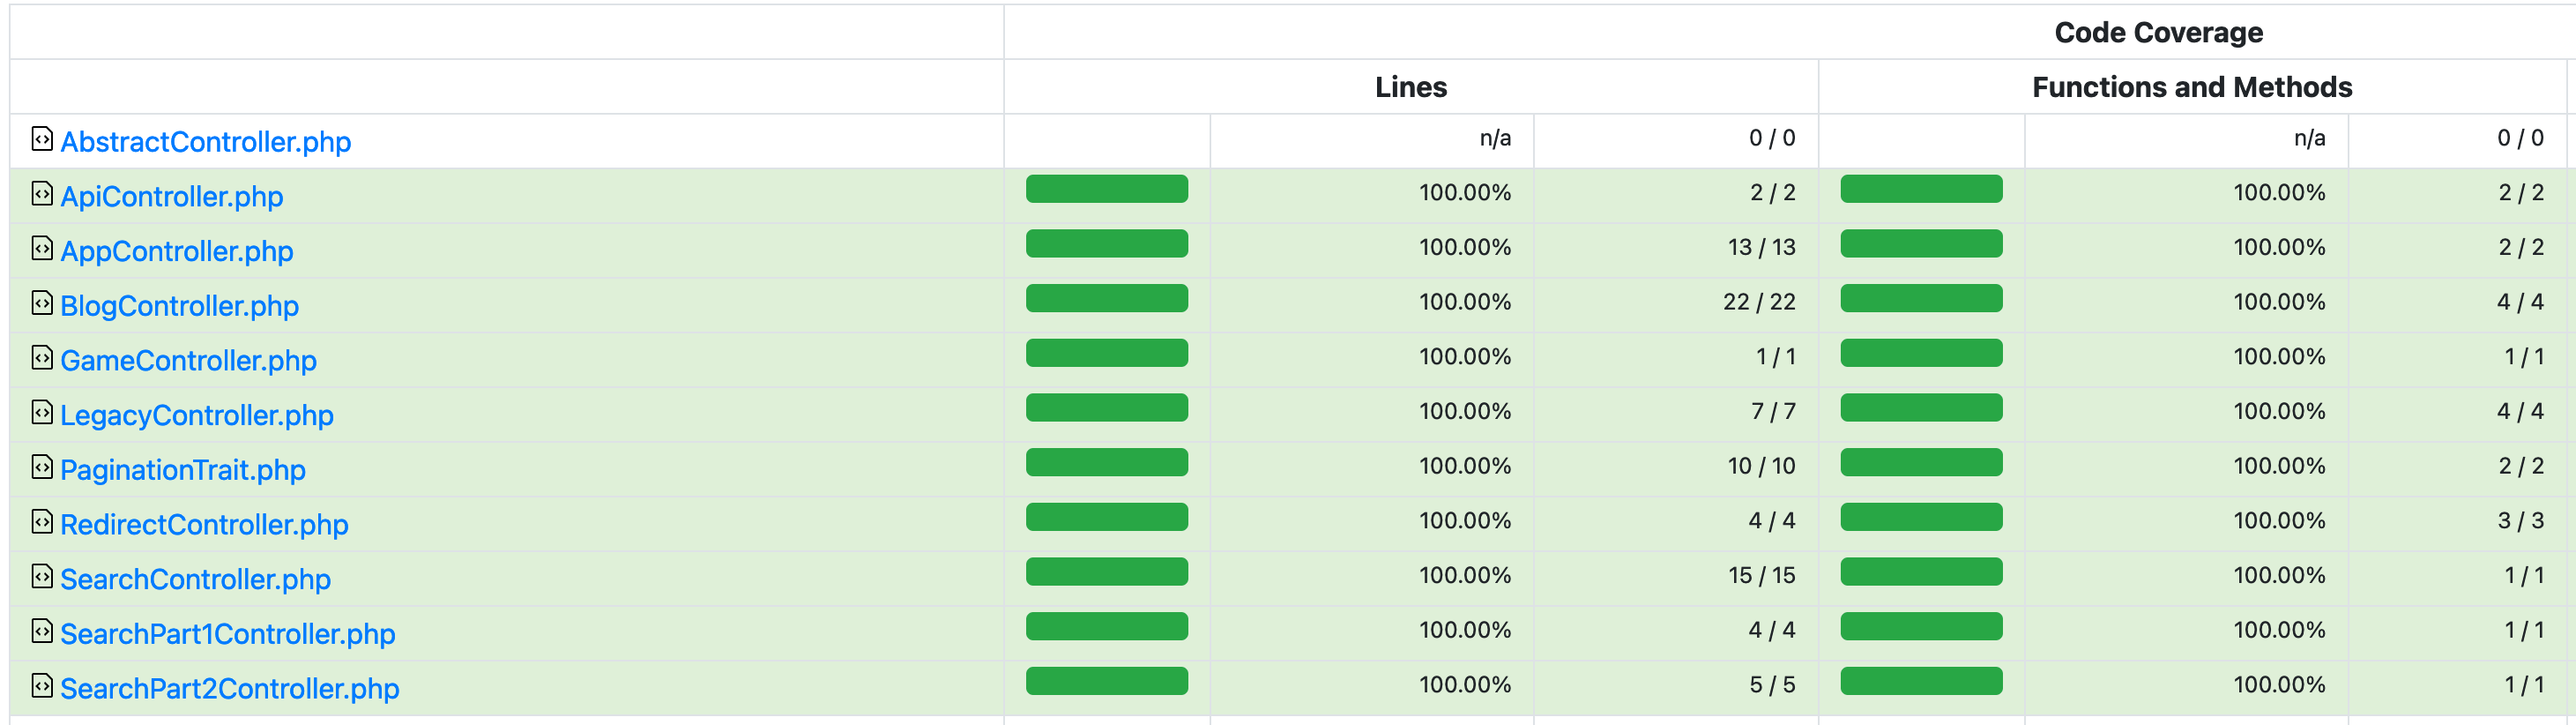 The code coverage of some of my controllers